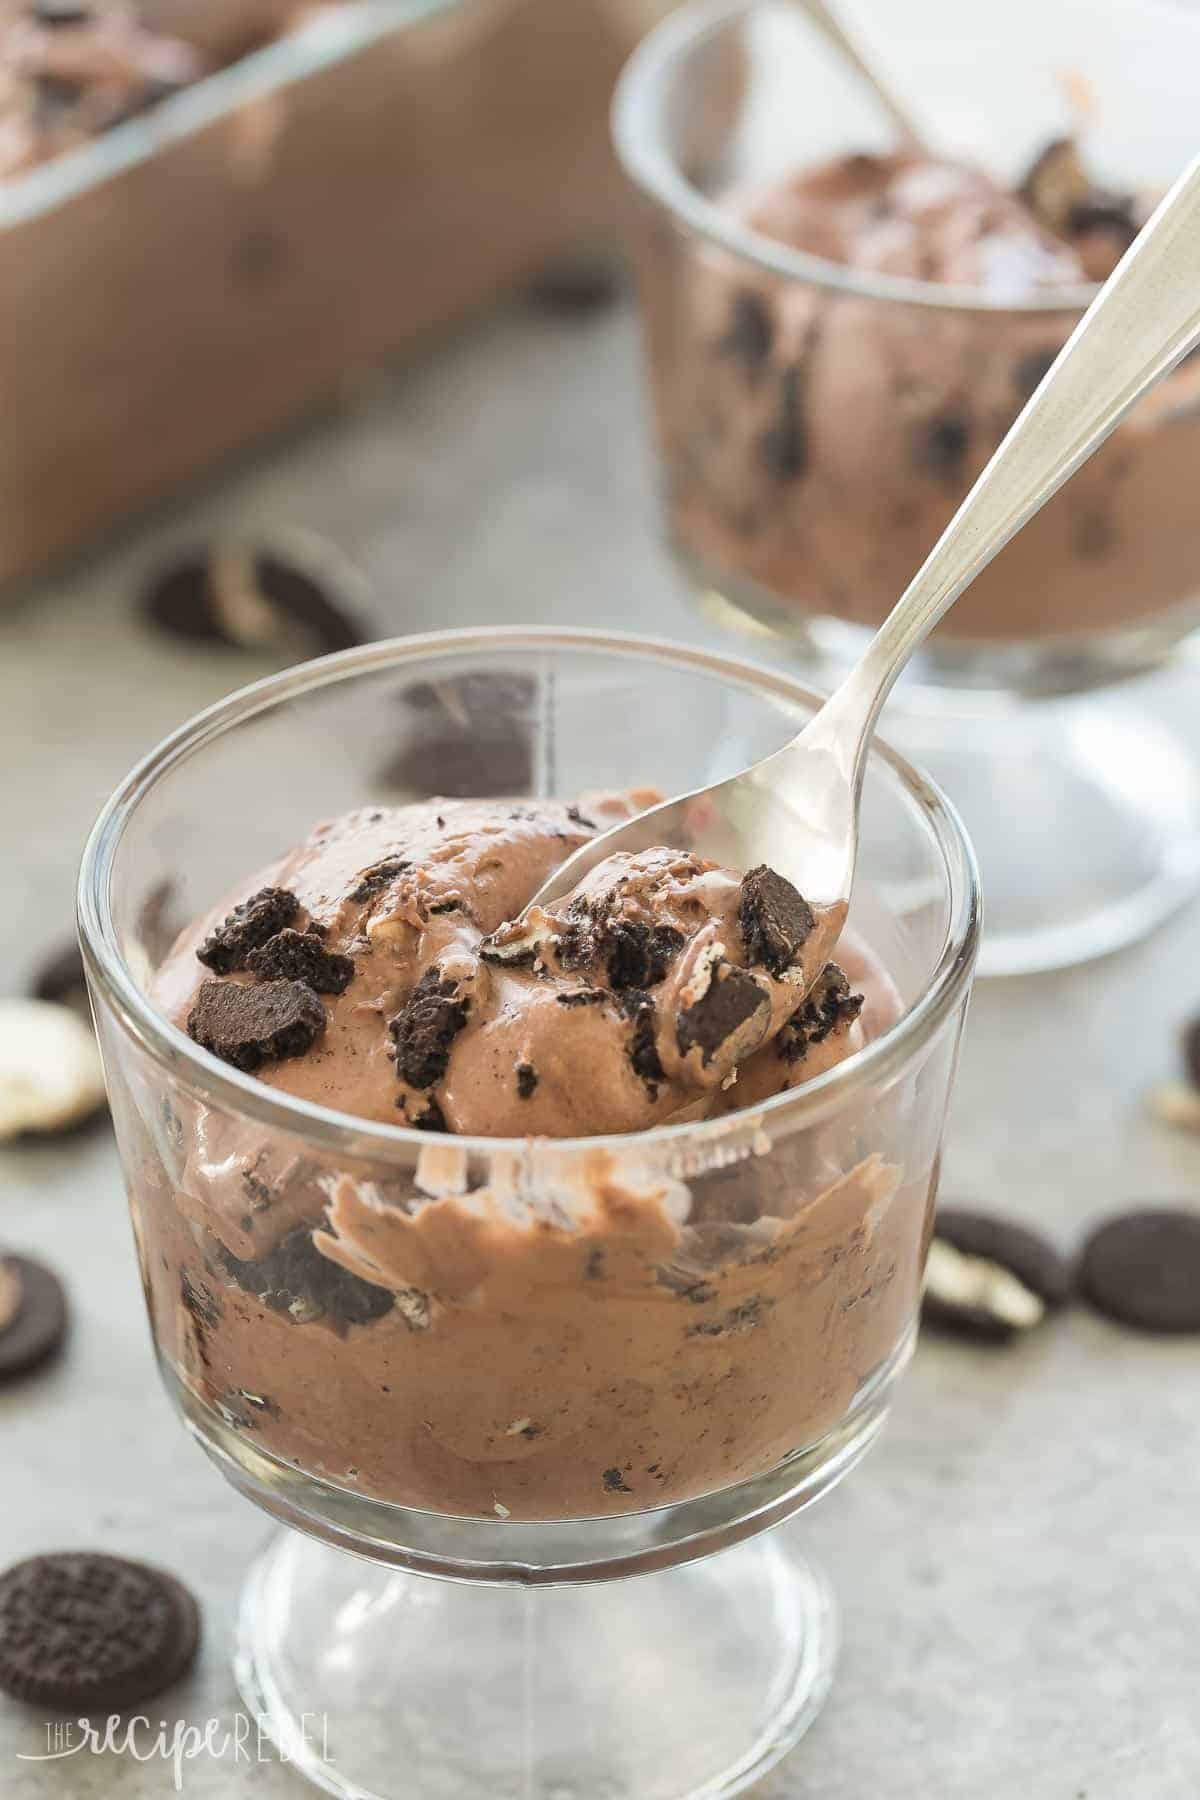 glass bowl of peanut butter oreo ice cream with spoon scooping some ice cream